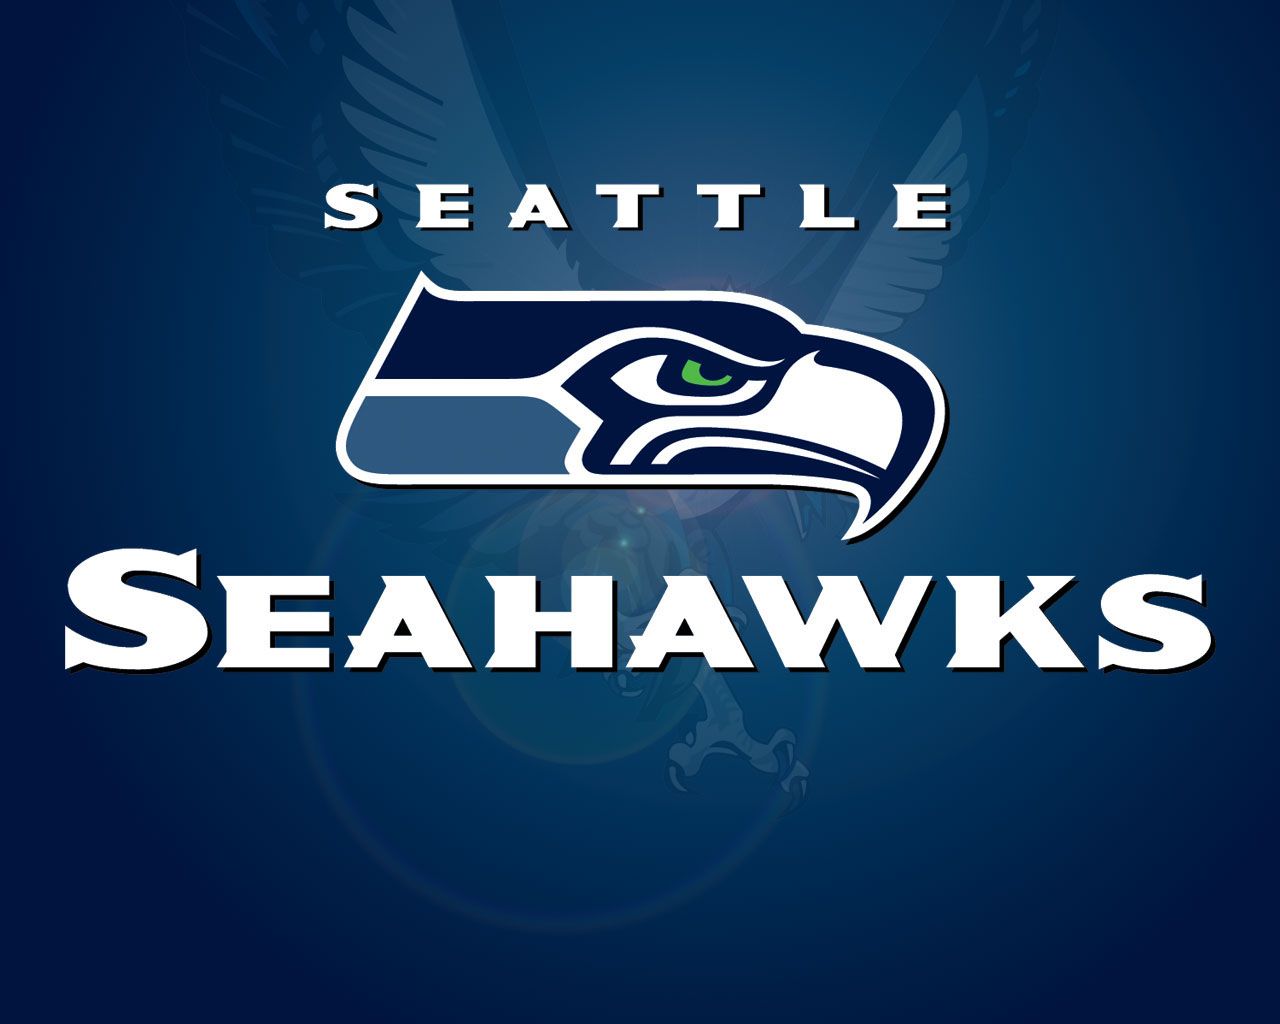 Seahawk Wallpaper For iPhone